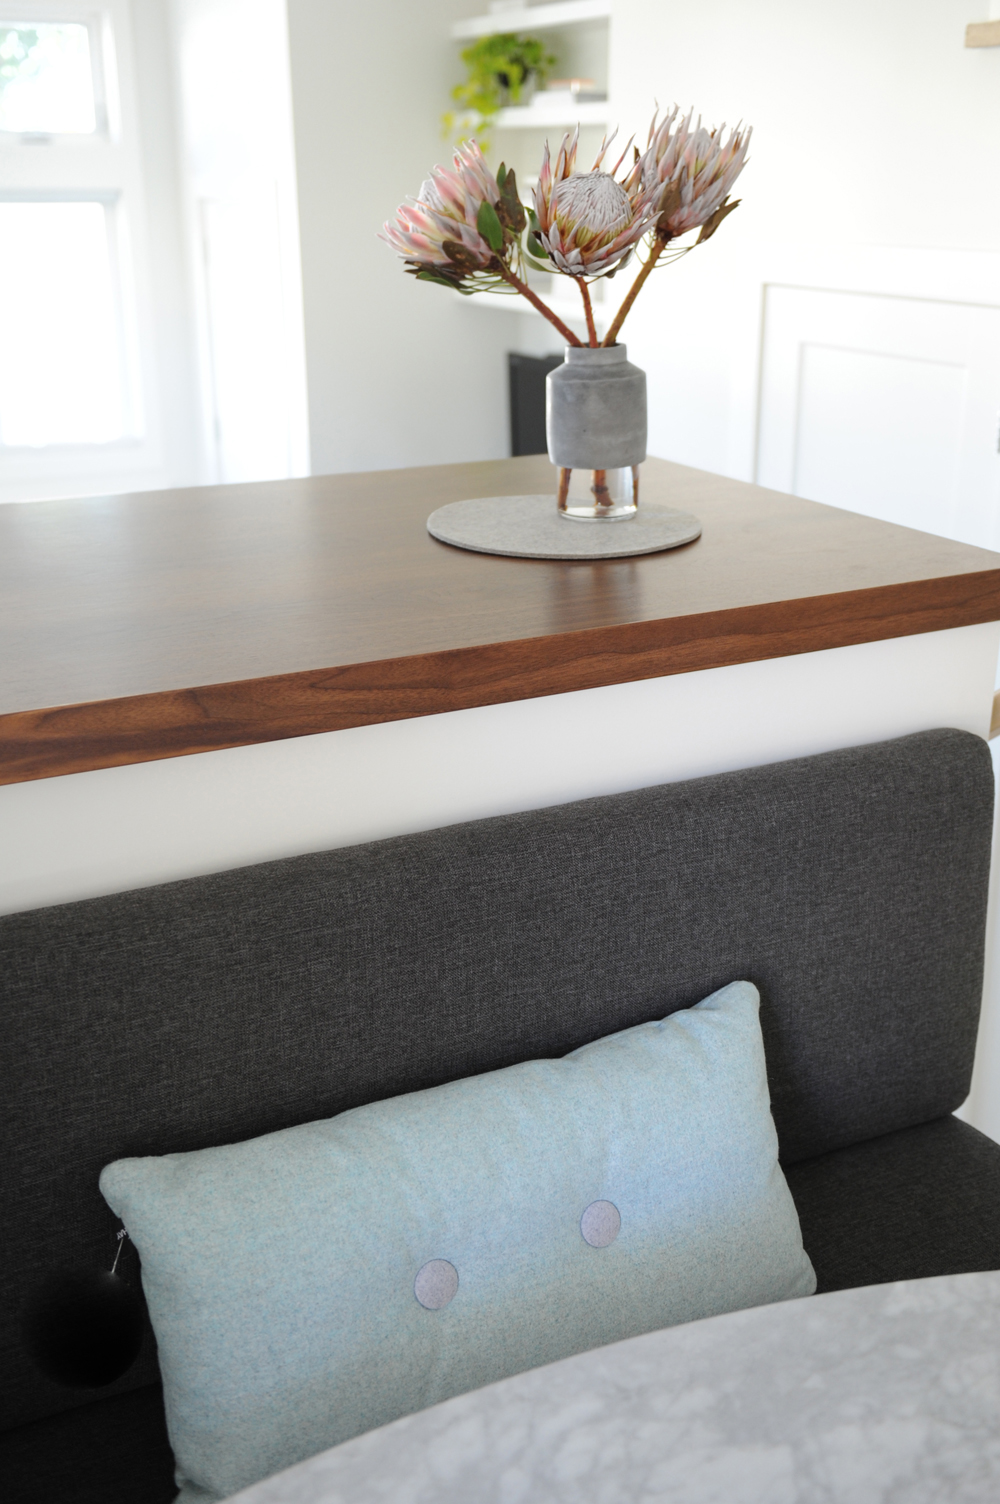 three protea stems, wood top counter, grey fabric bench with blue cushion